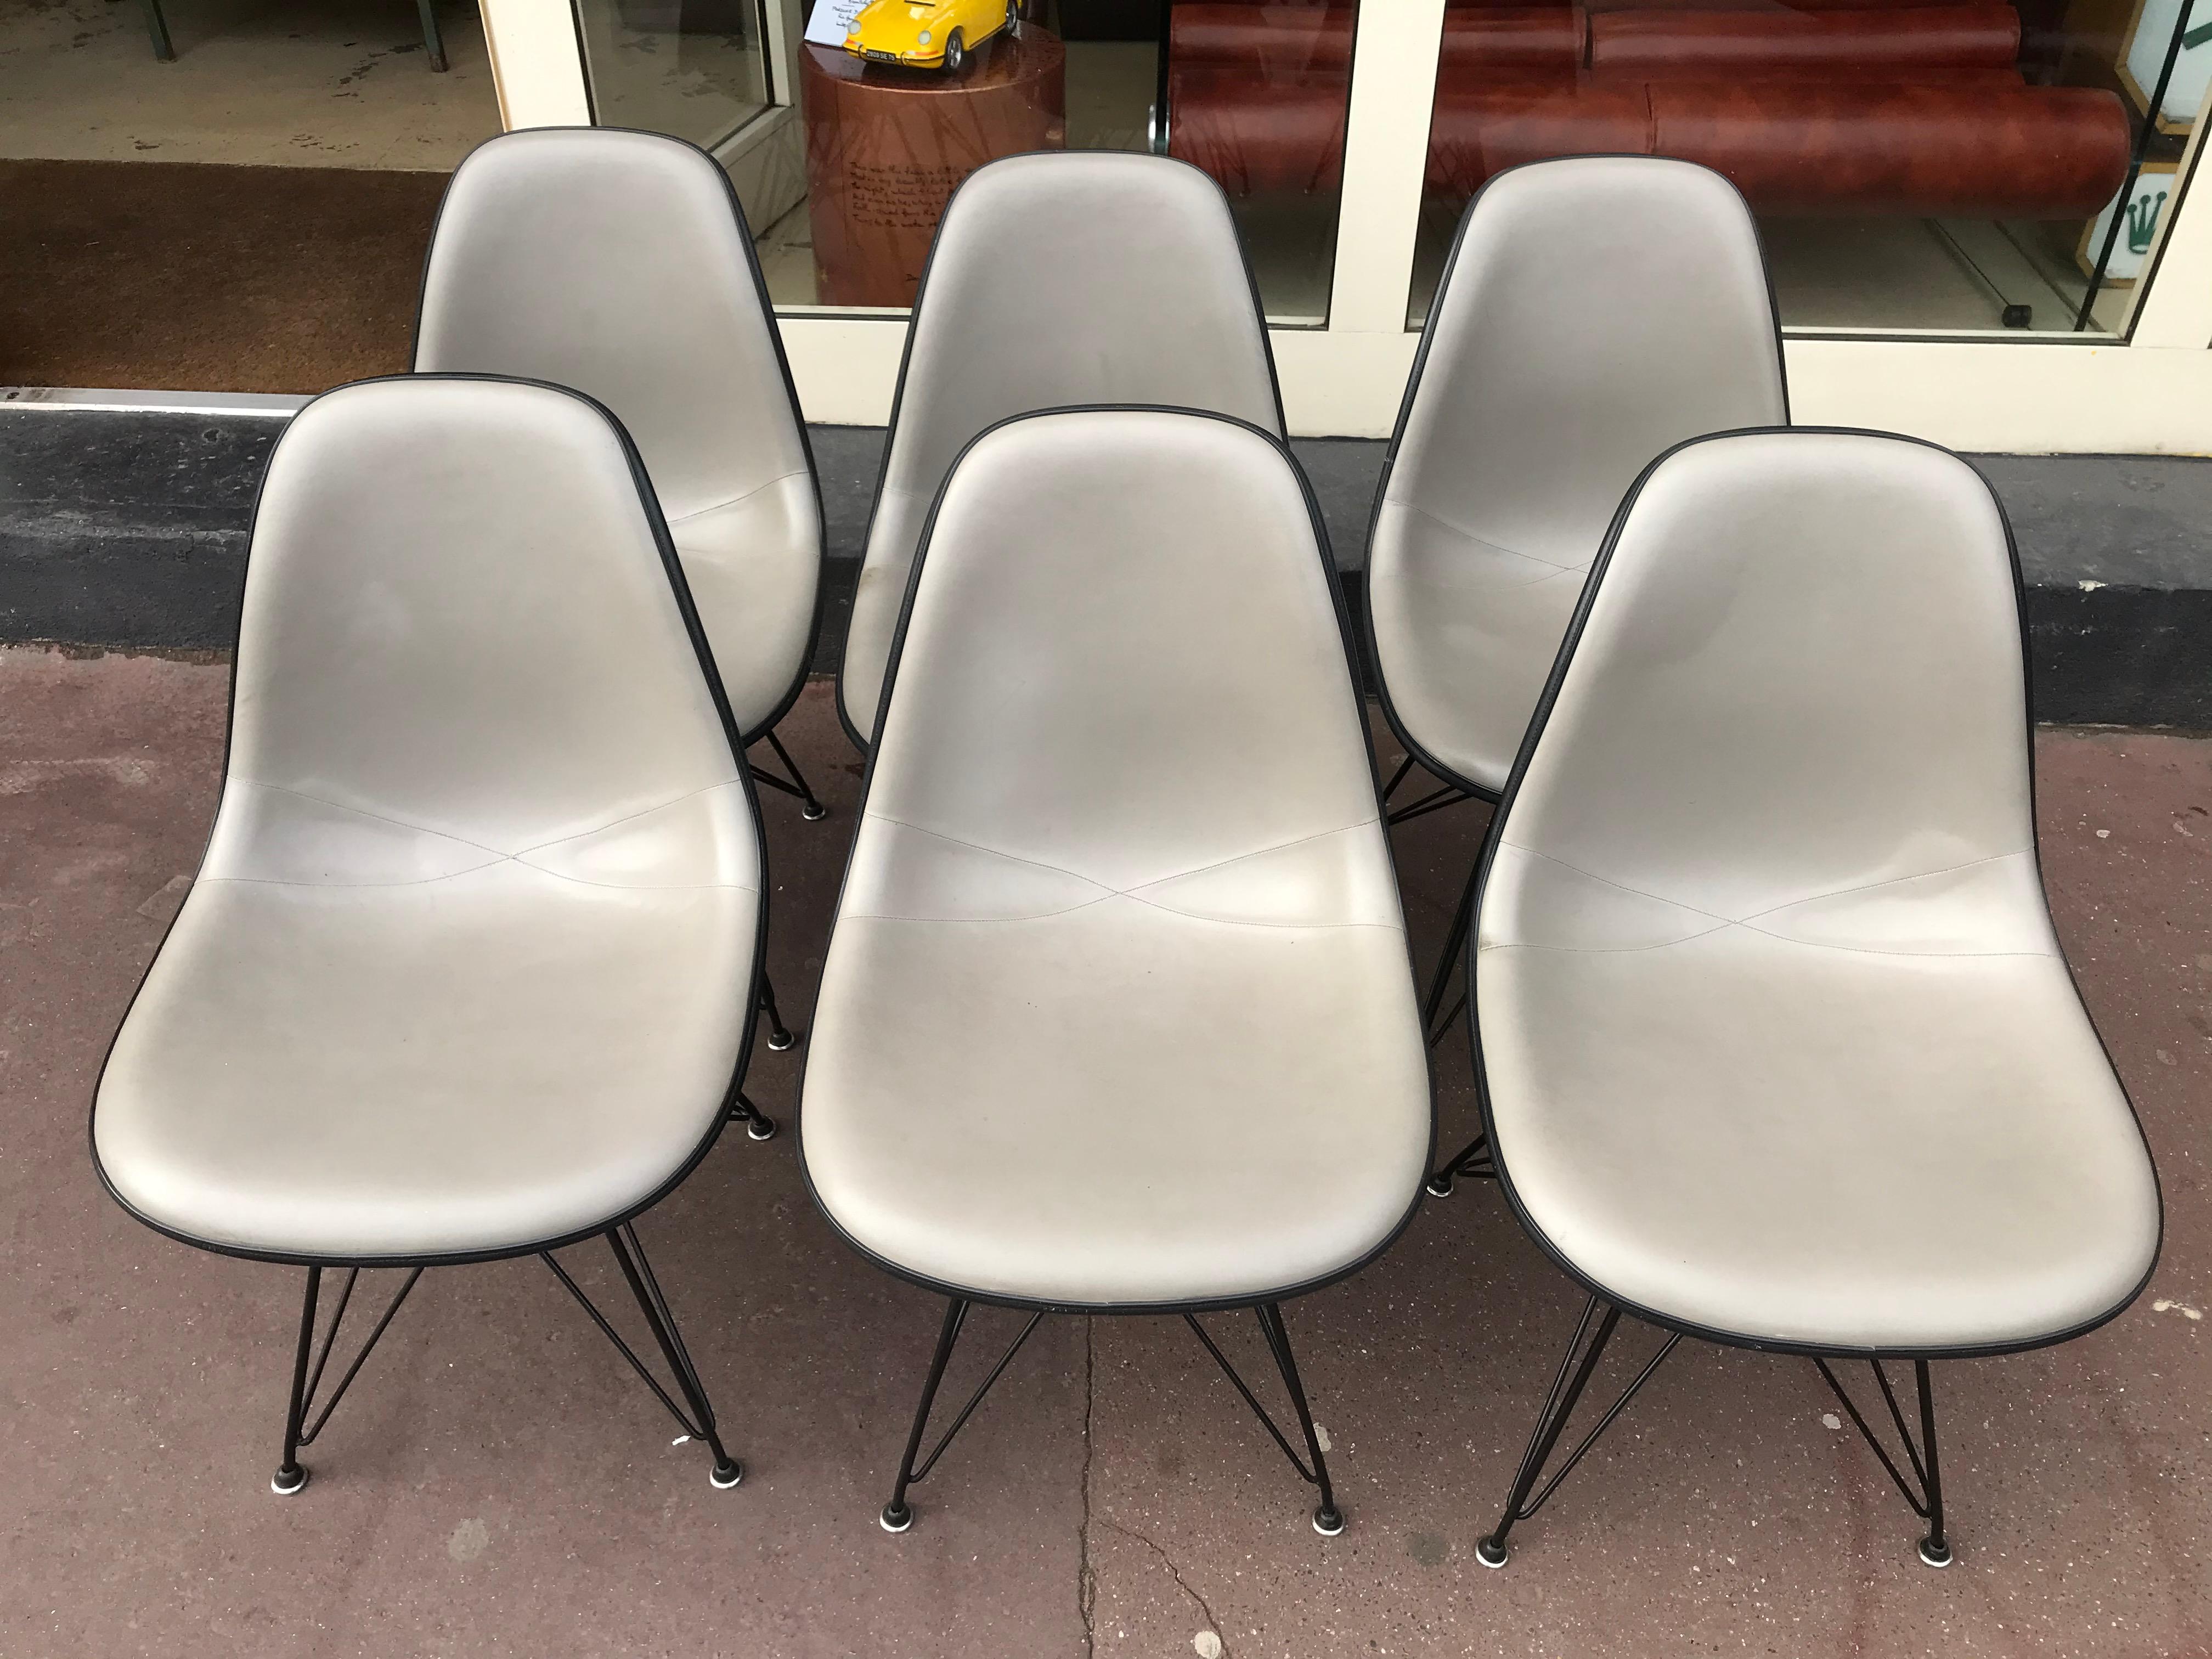 Charles Eames, set of 6 chairs DSW, leather grey version, circa 1970
Rare luxury version, very comfortable, padded gray leather
Eiffel feet -
Fiberglass -
Marking and labels, flocked U of U, university of Utah
Very good condition.
 